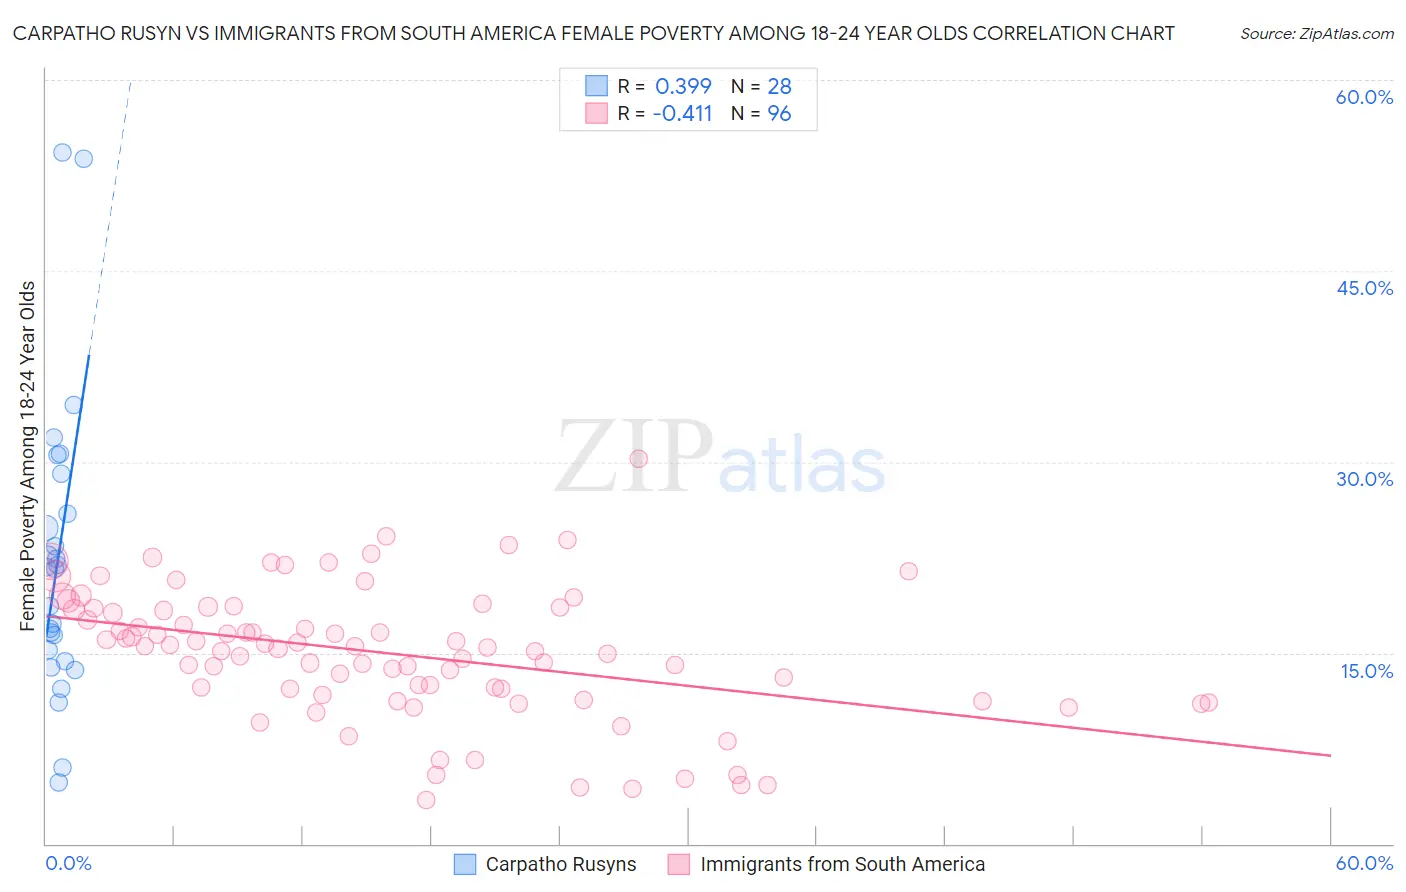 Carpatho Rusyn vs Immigrants from South America Female Poverty Among 18-24 Year Olds